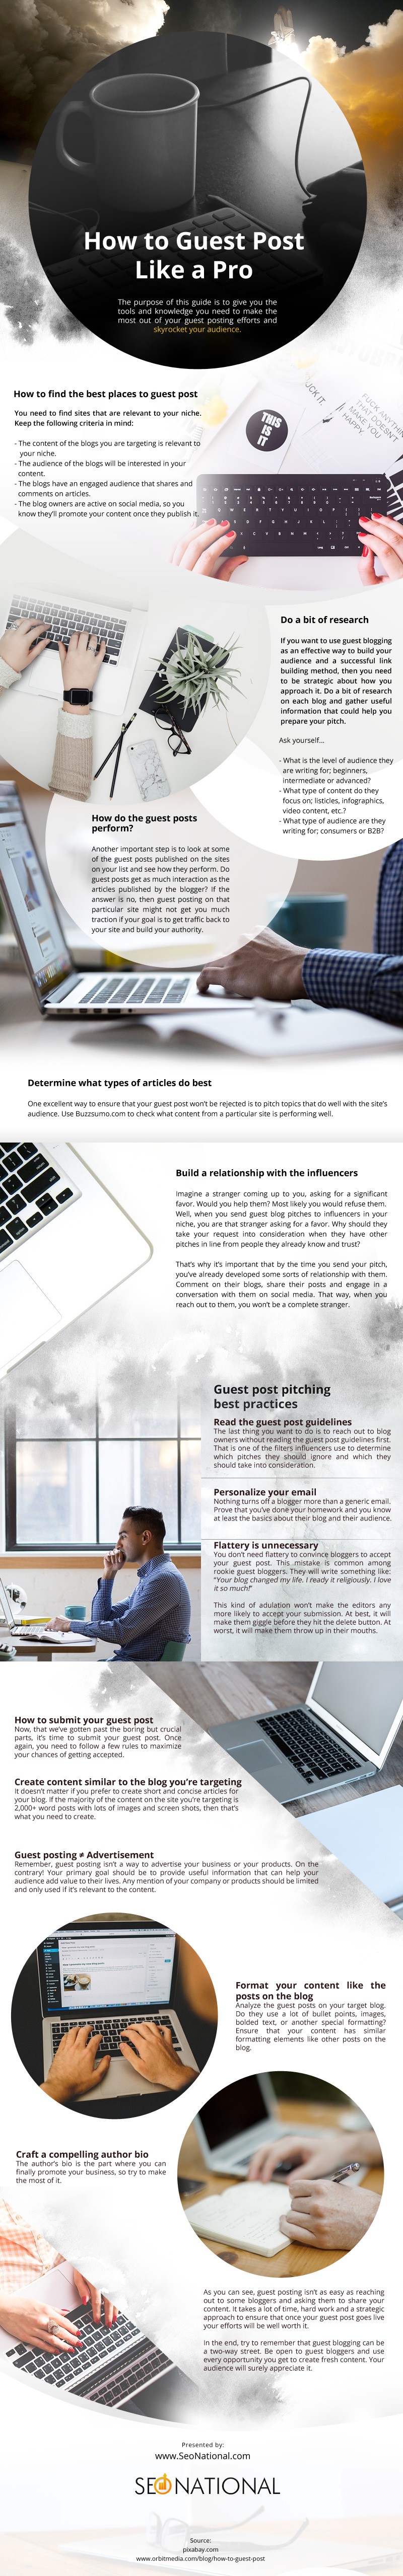 How to Guest Post Like a Pro [infographic]